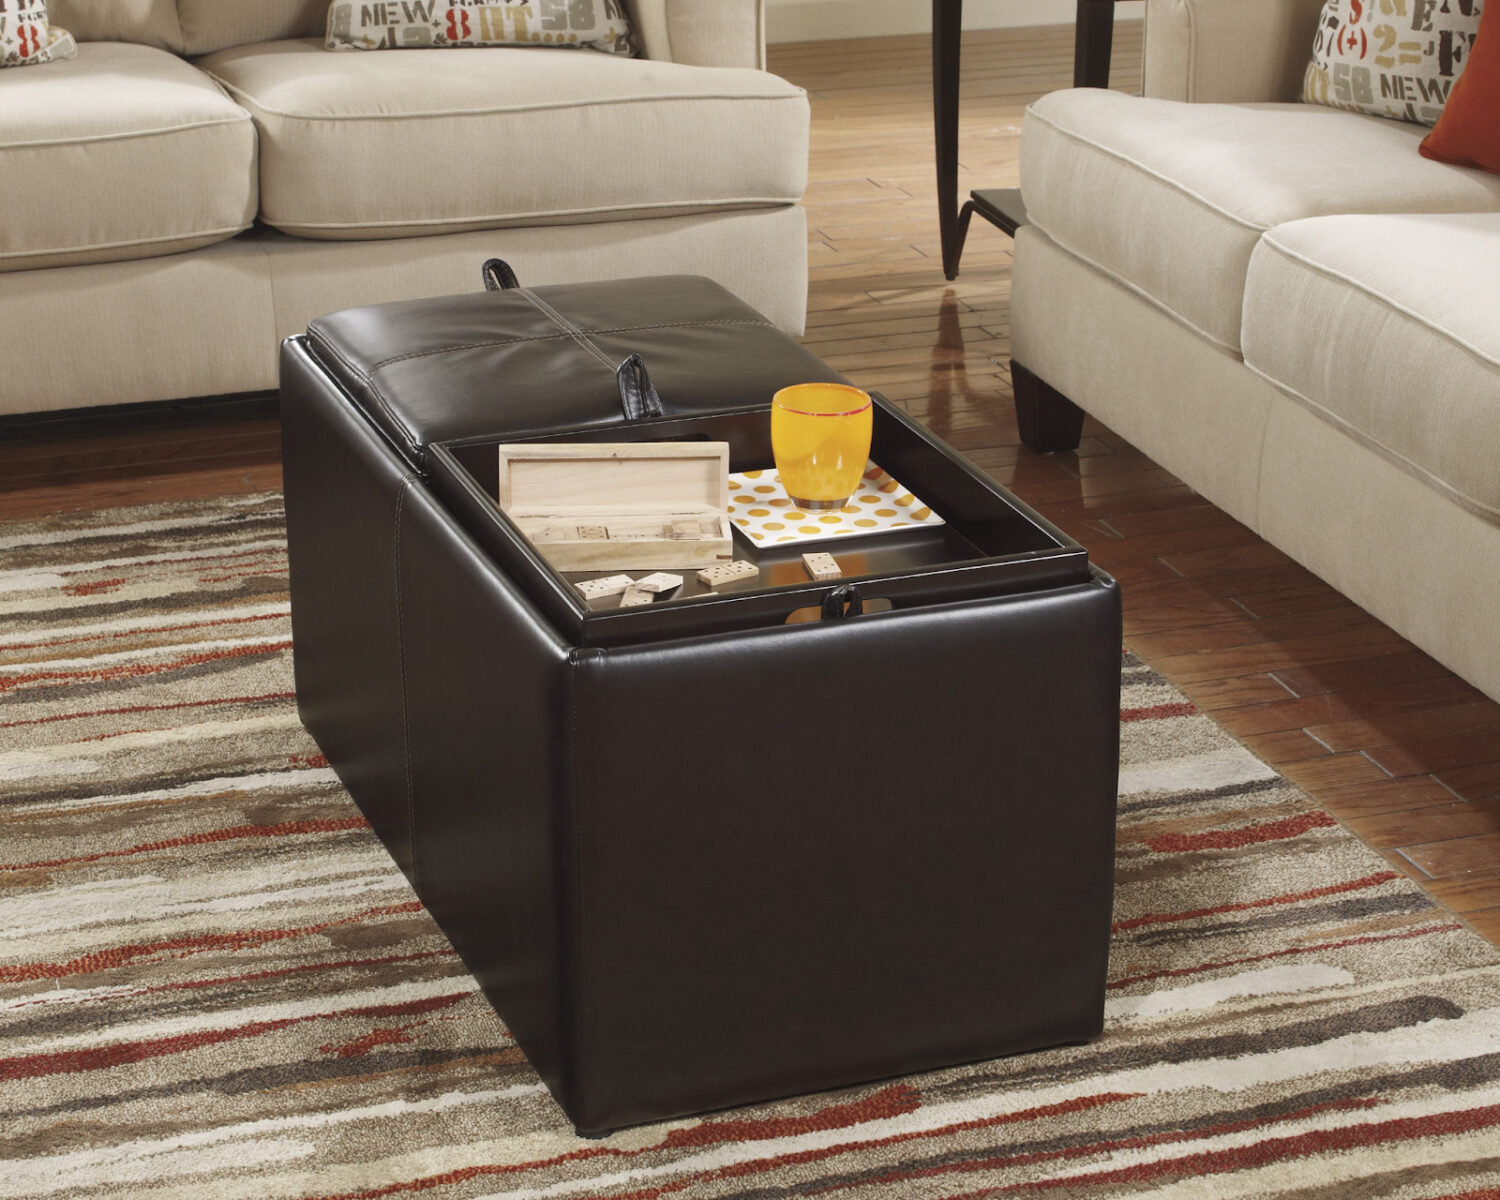 Leather Upholstered Coffee Table